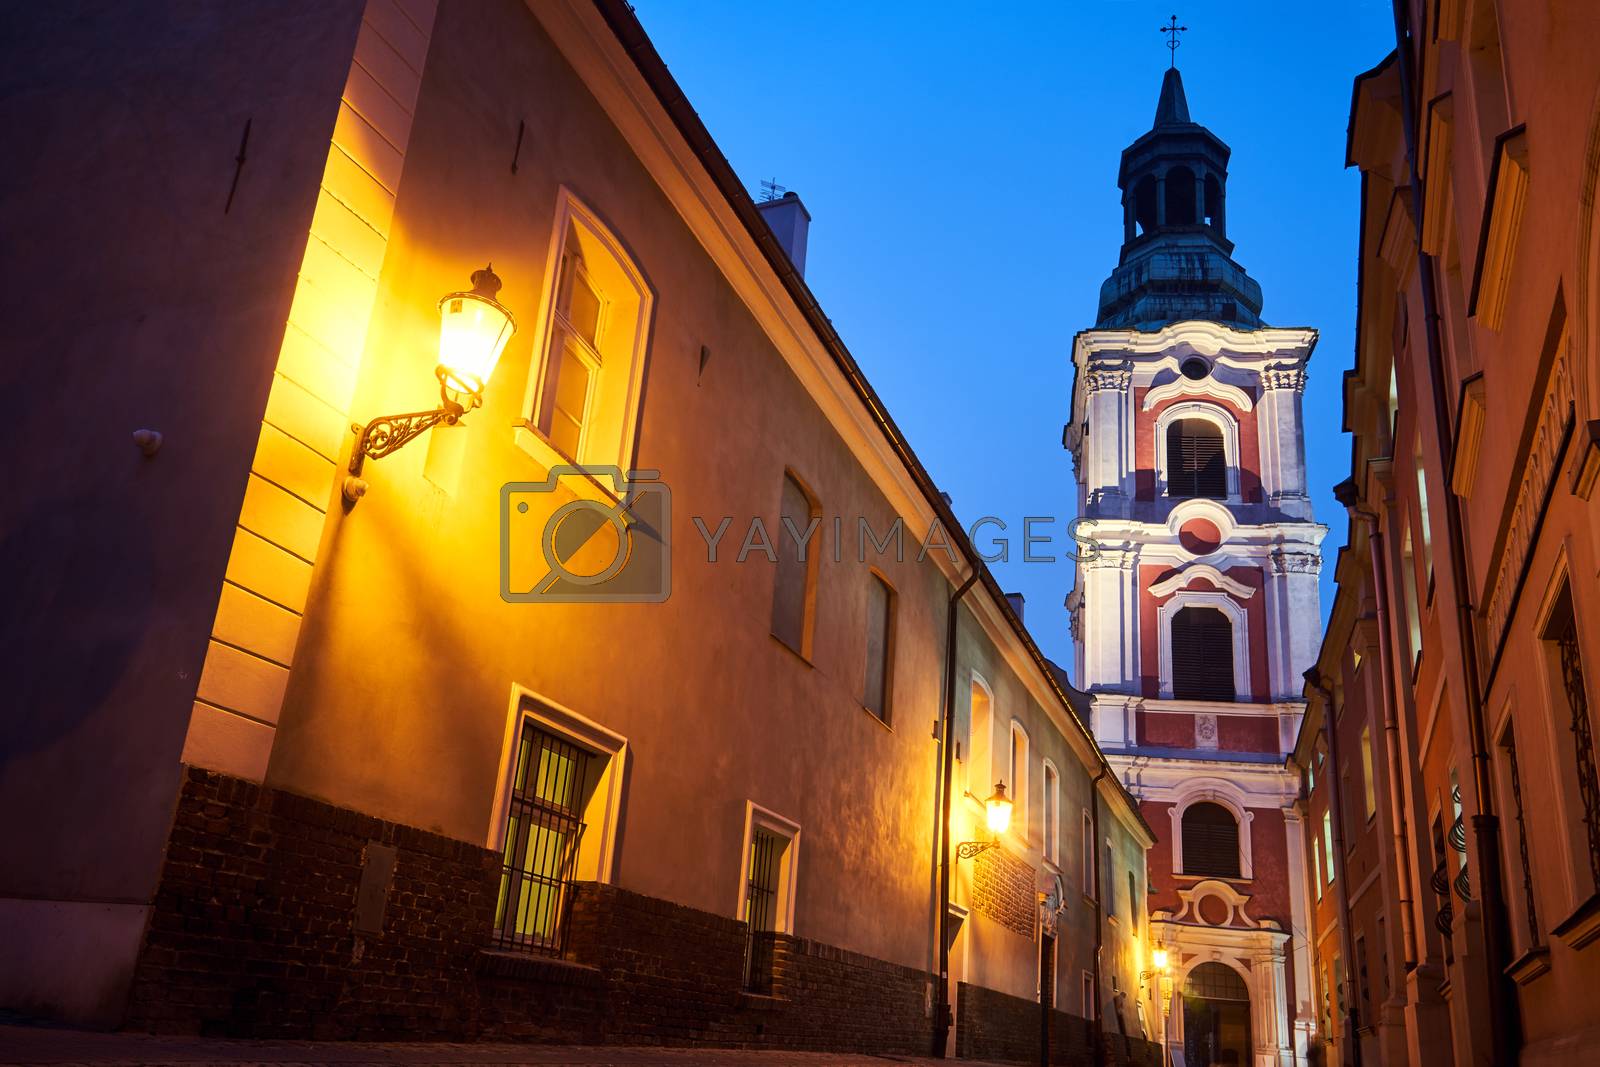 Royalty free image of narrow street and belfry of the baroque historic church by gkordus